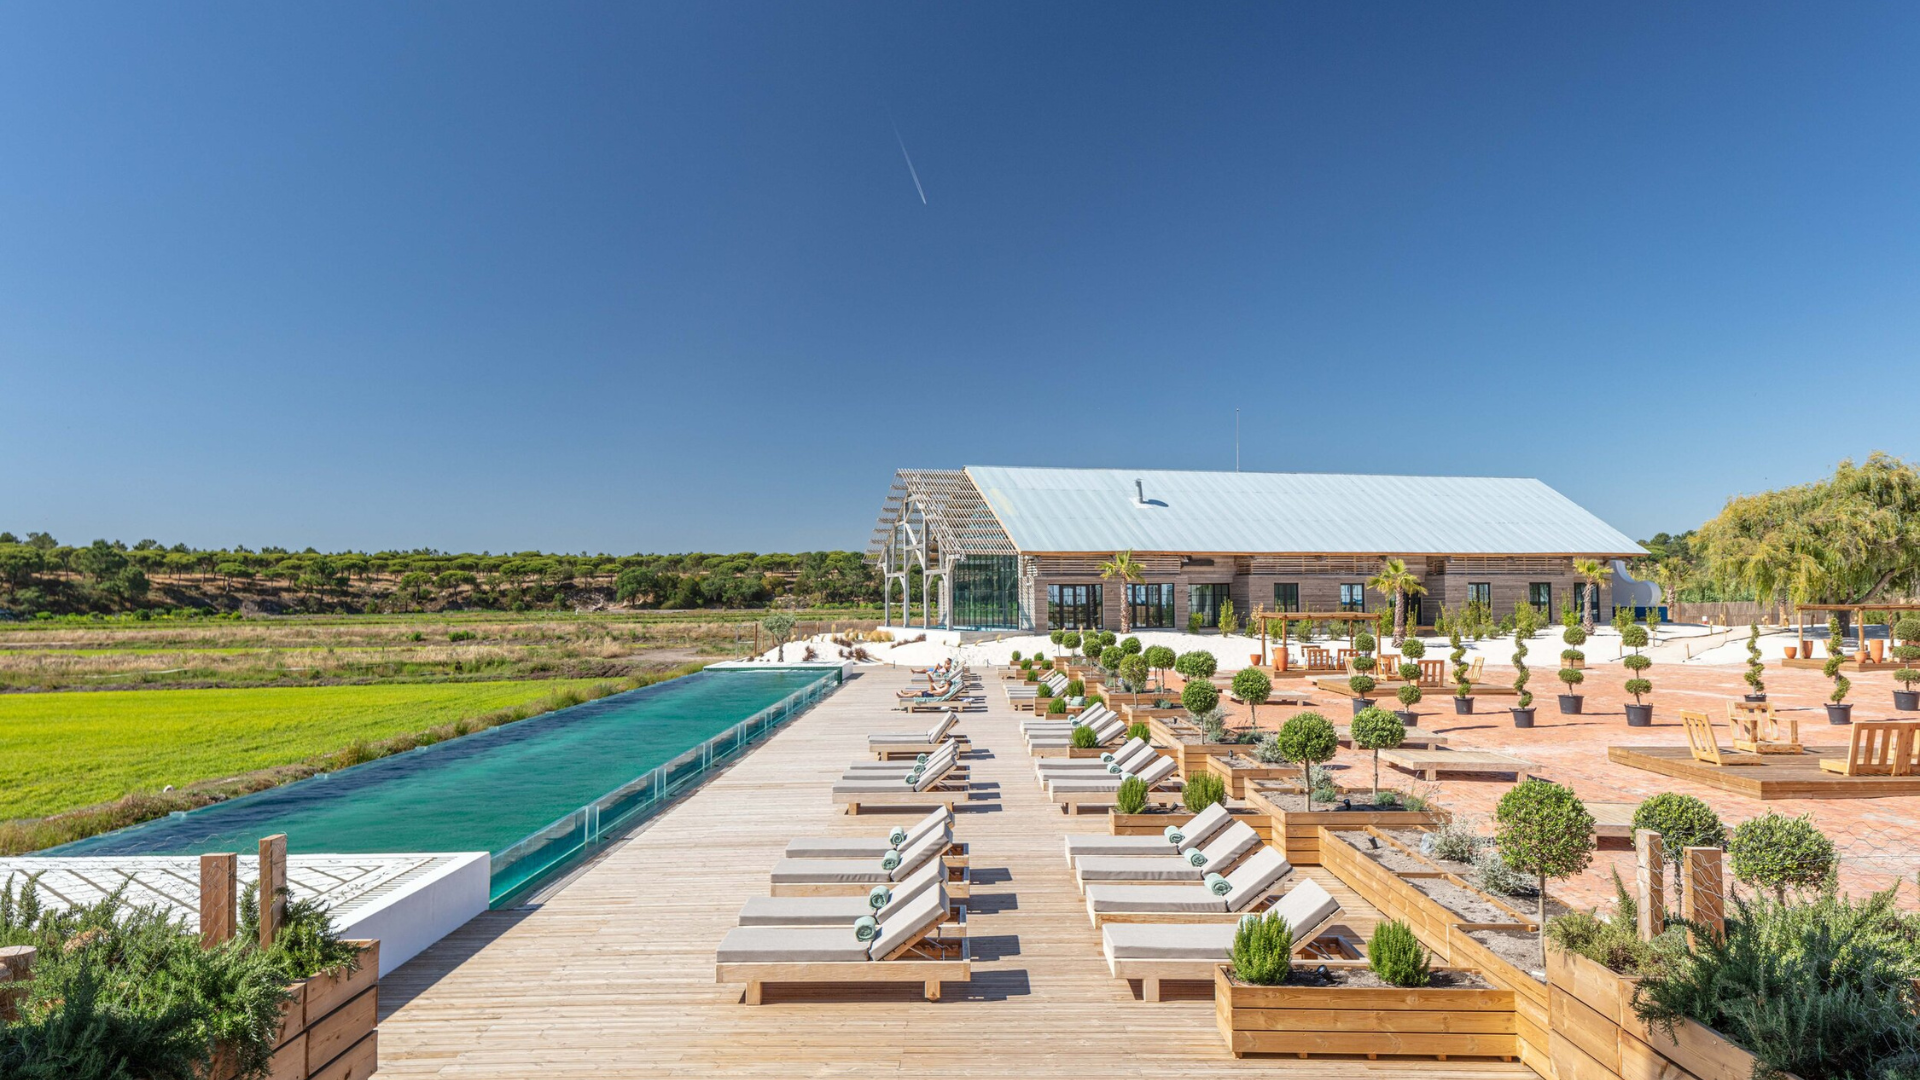 The best hotels in Portugal according to Condé Nast Traveller (32)